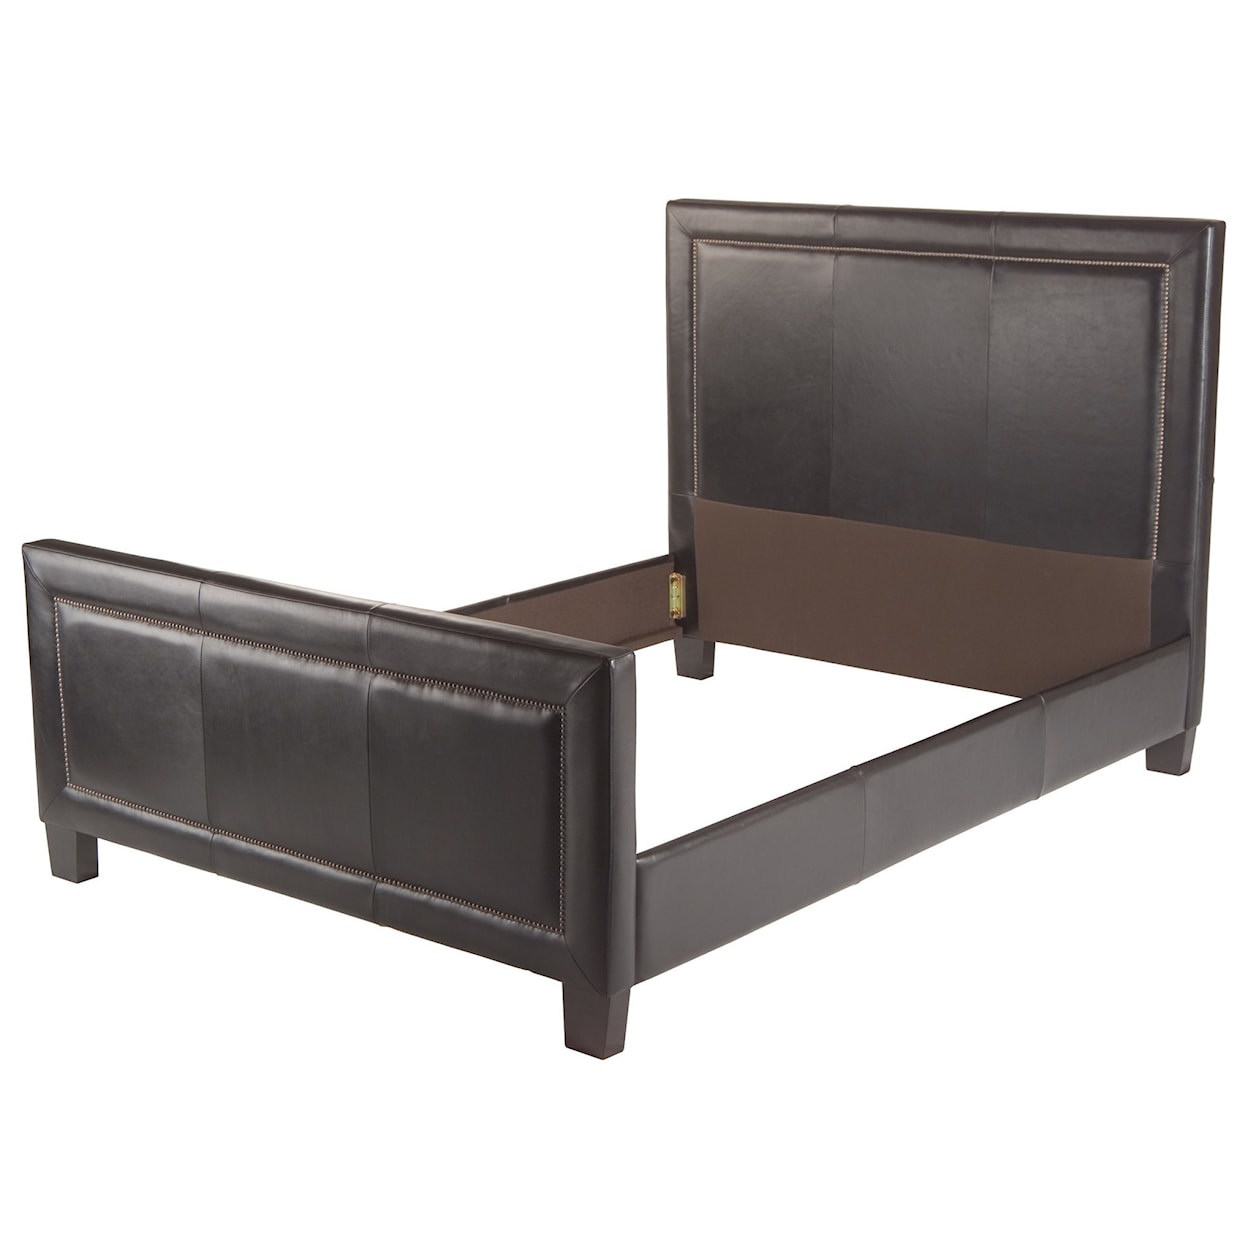 American Leather Copeland Upholstered King Bed